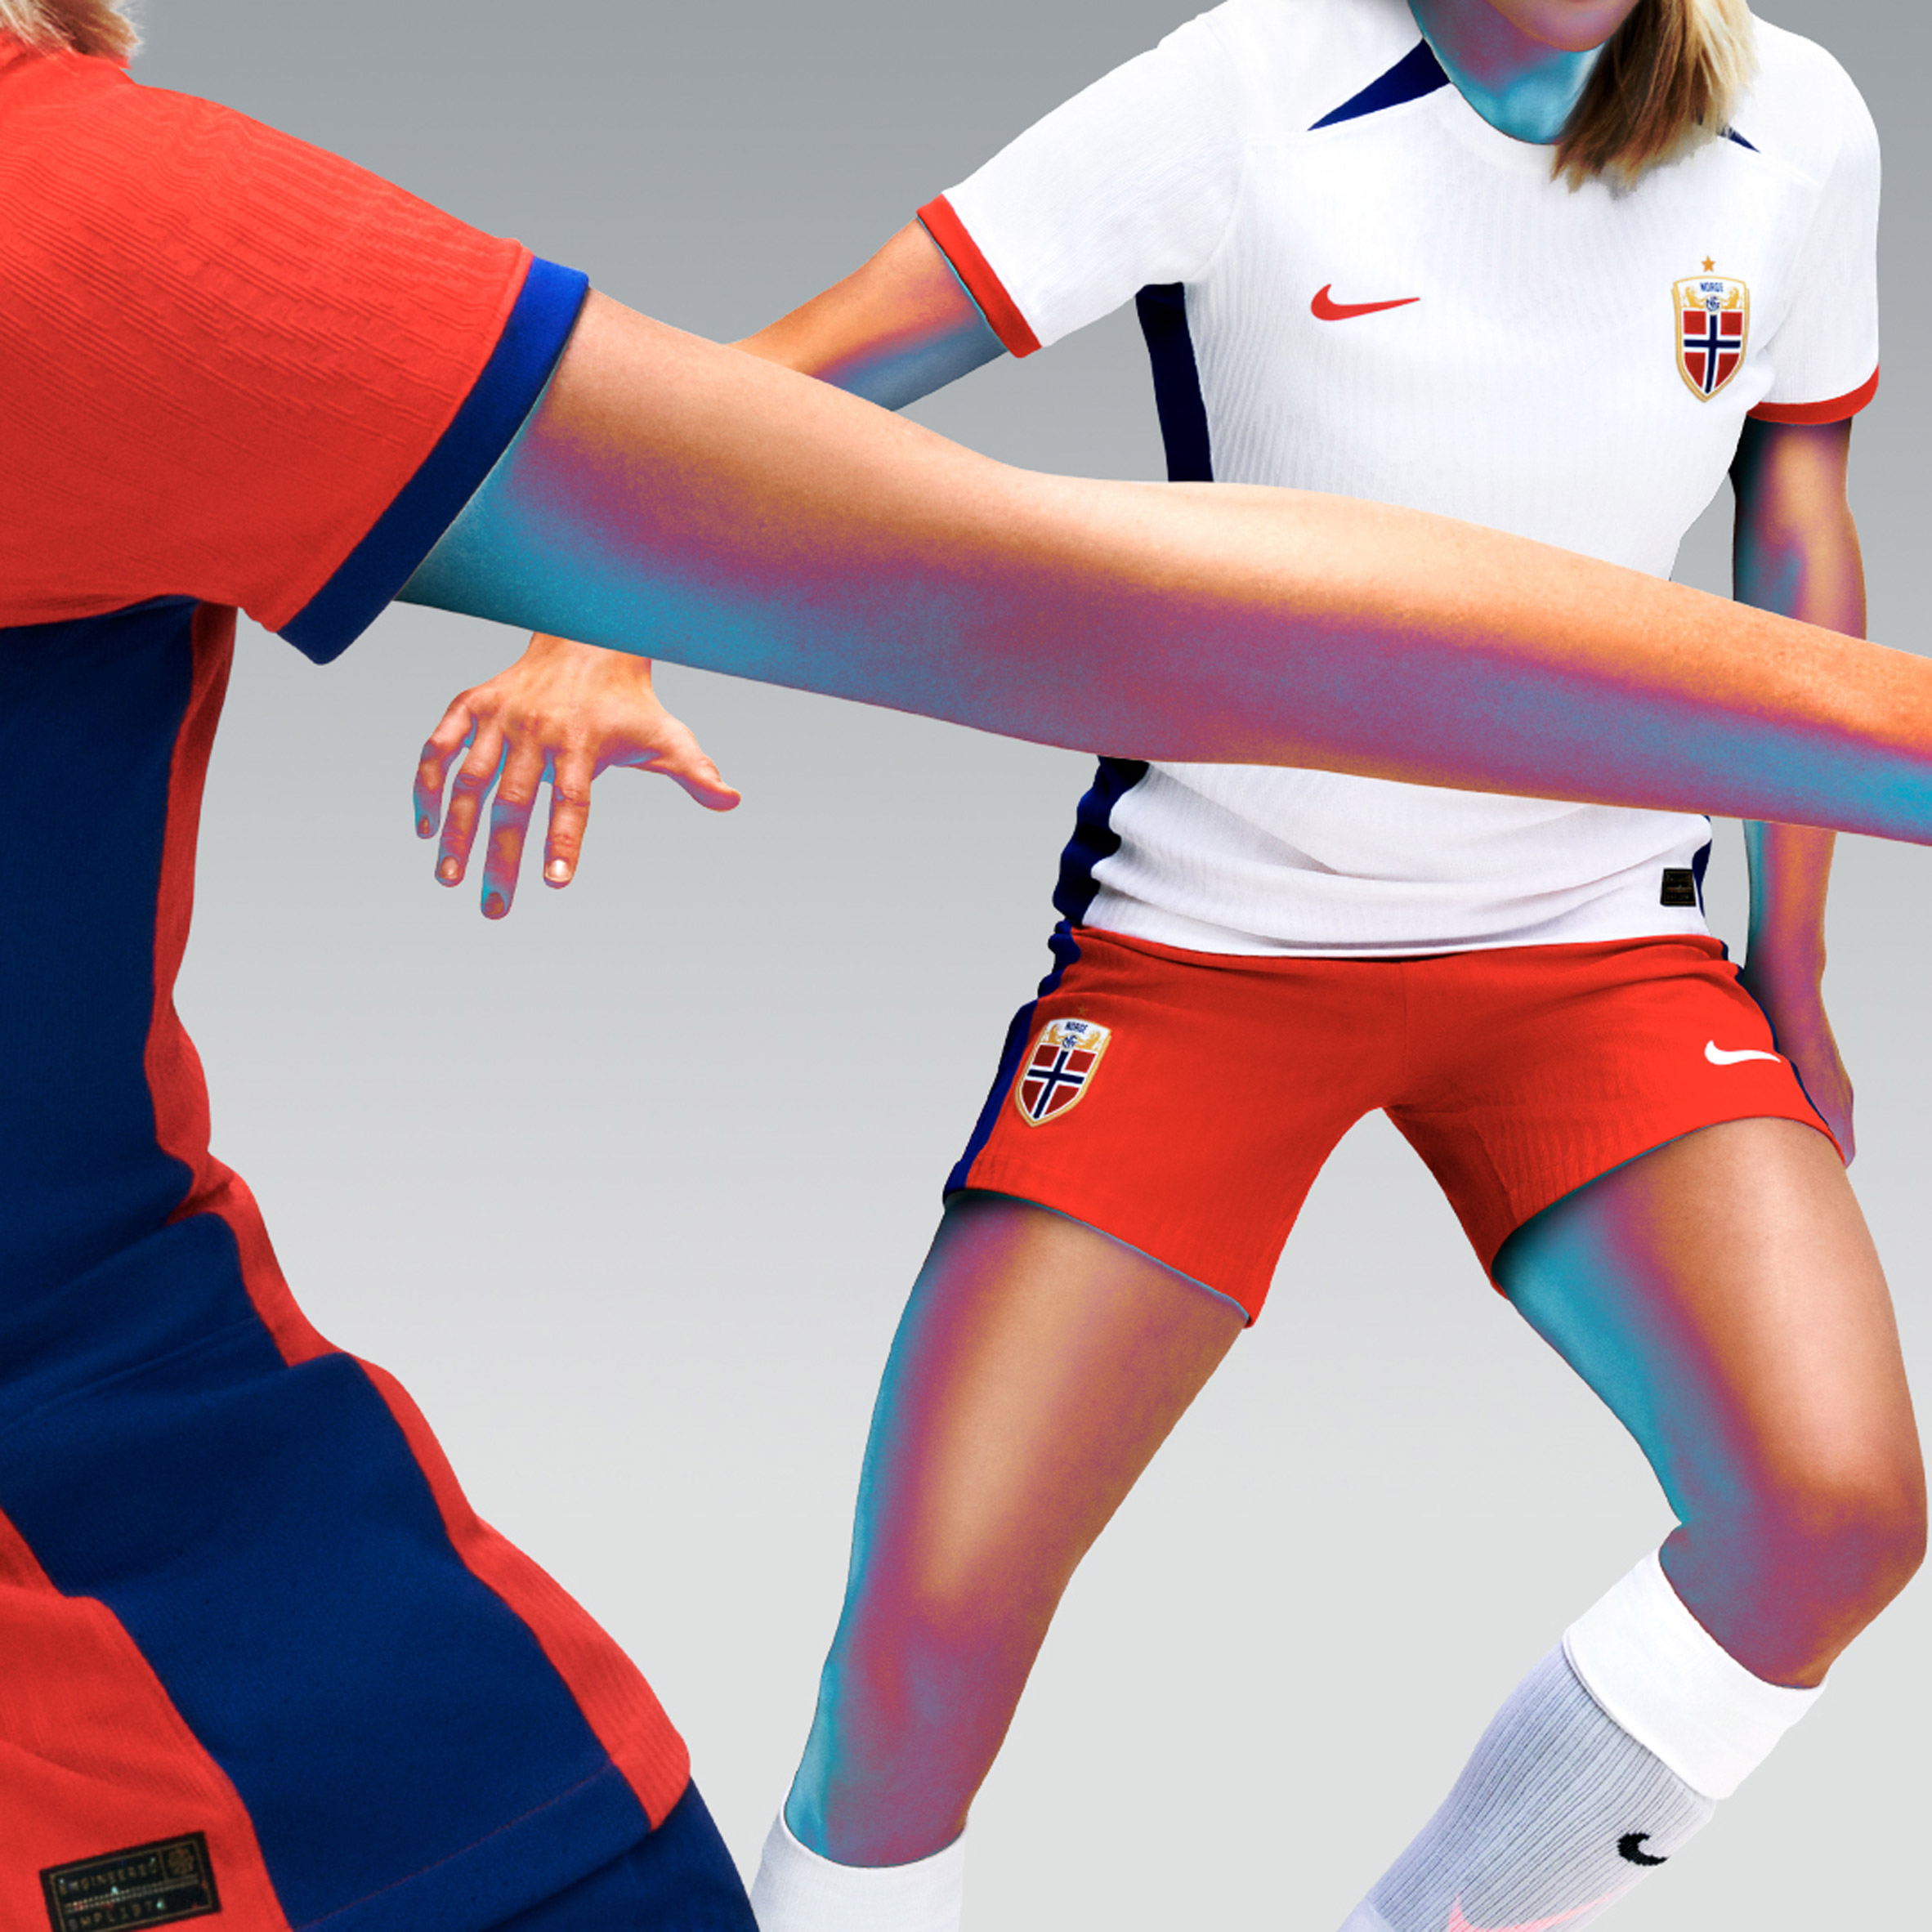 Norway Women's World Cup kit by Nike